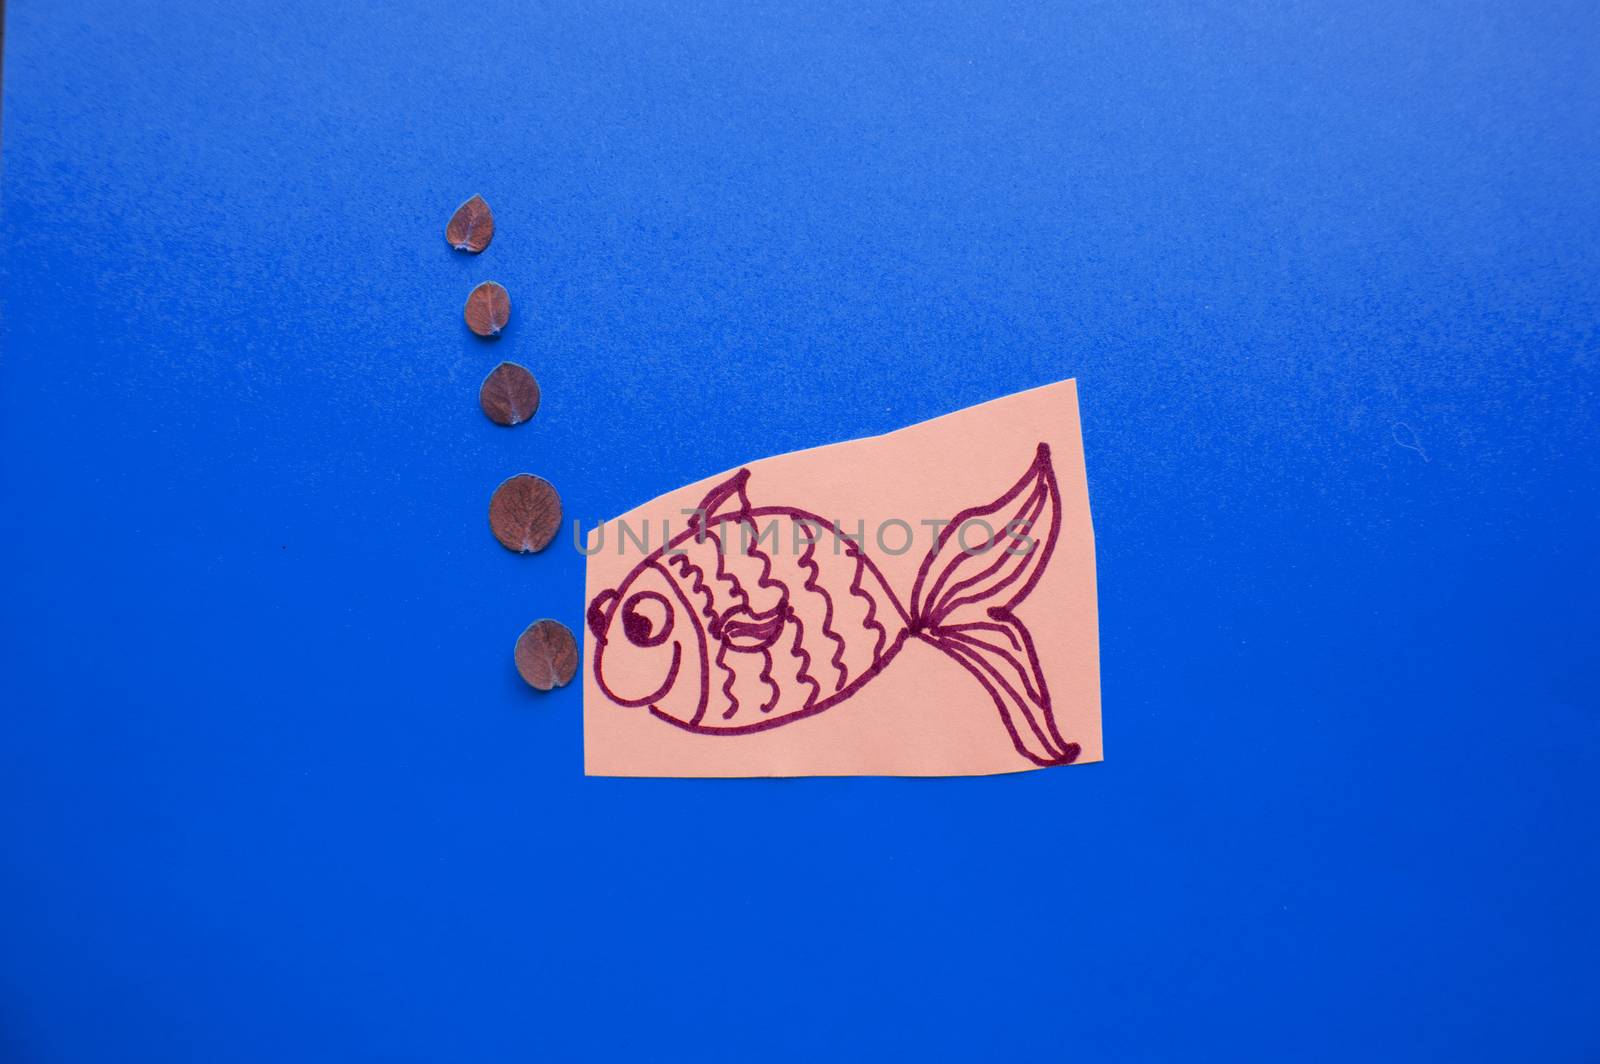 Funny fish with bubbles on blue background, fool's Day.